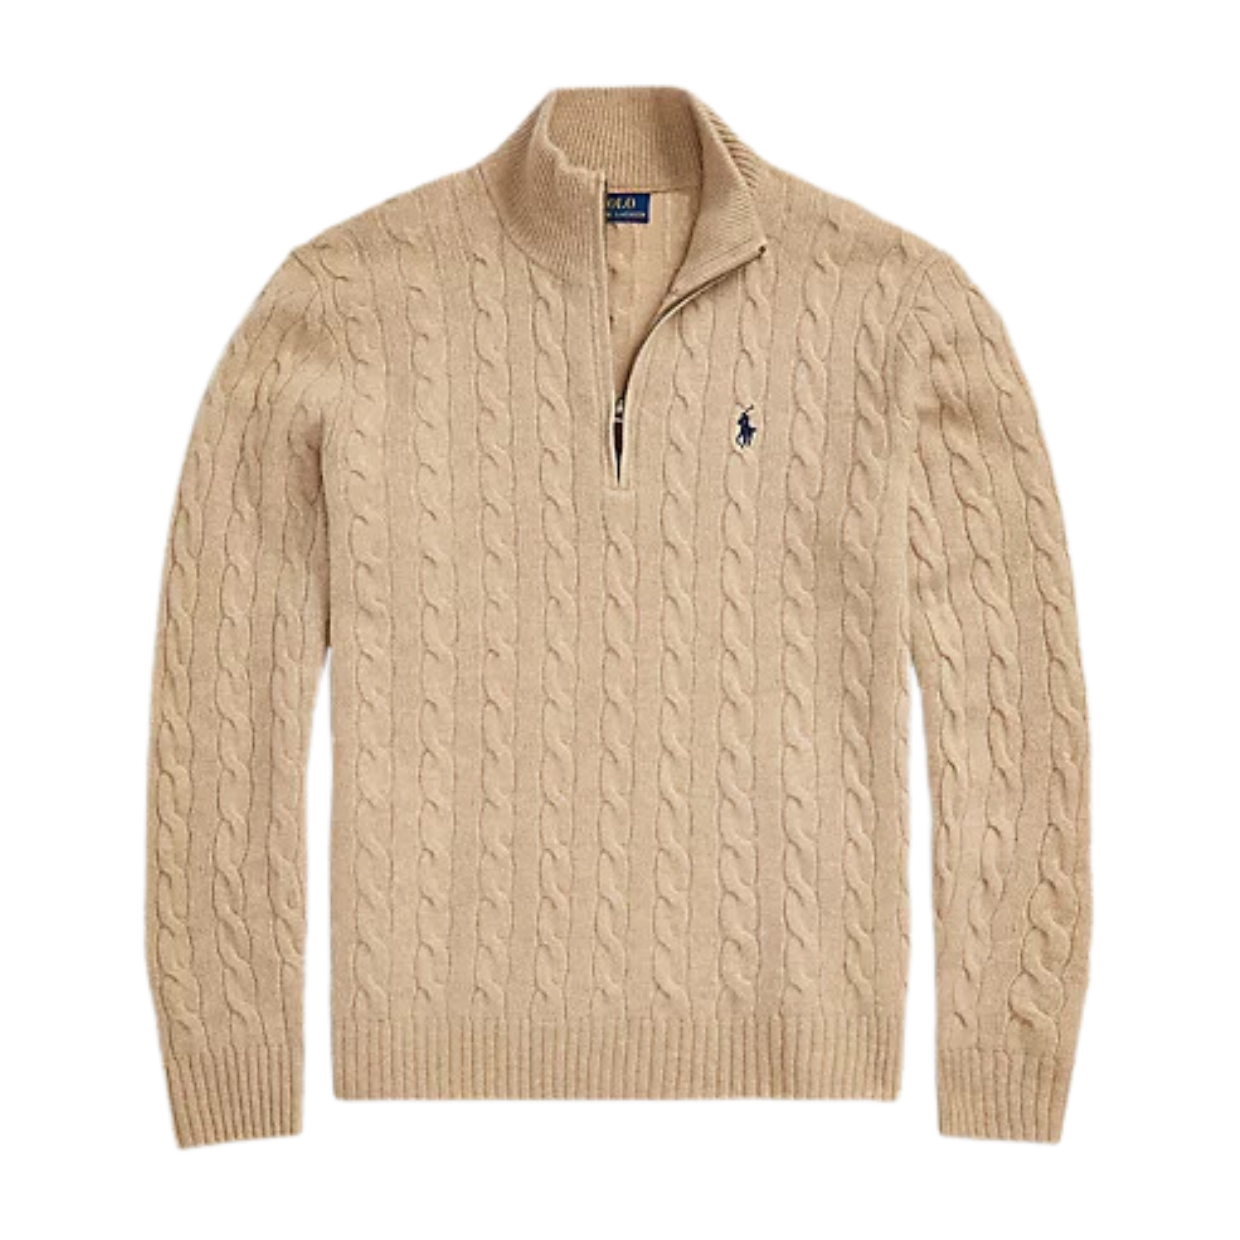 Polo Ralph Lauren Brown Cable Knit Sweater